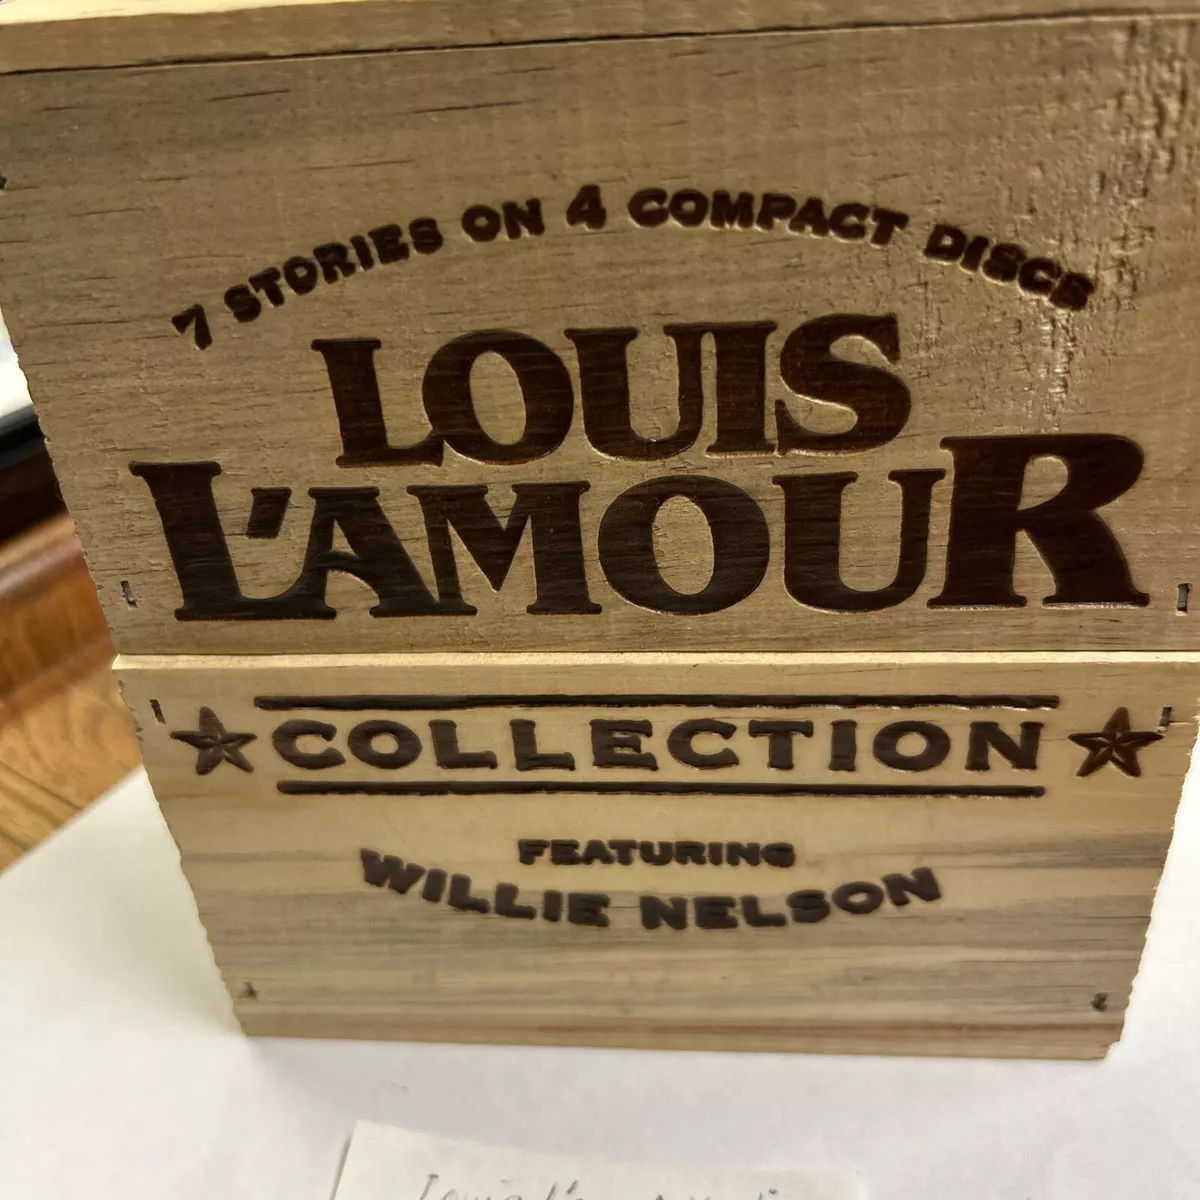 Louie L'amour Collection Featuring Willie Nelson 7 Stories On 4